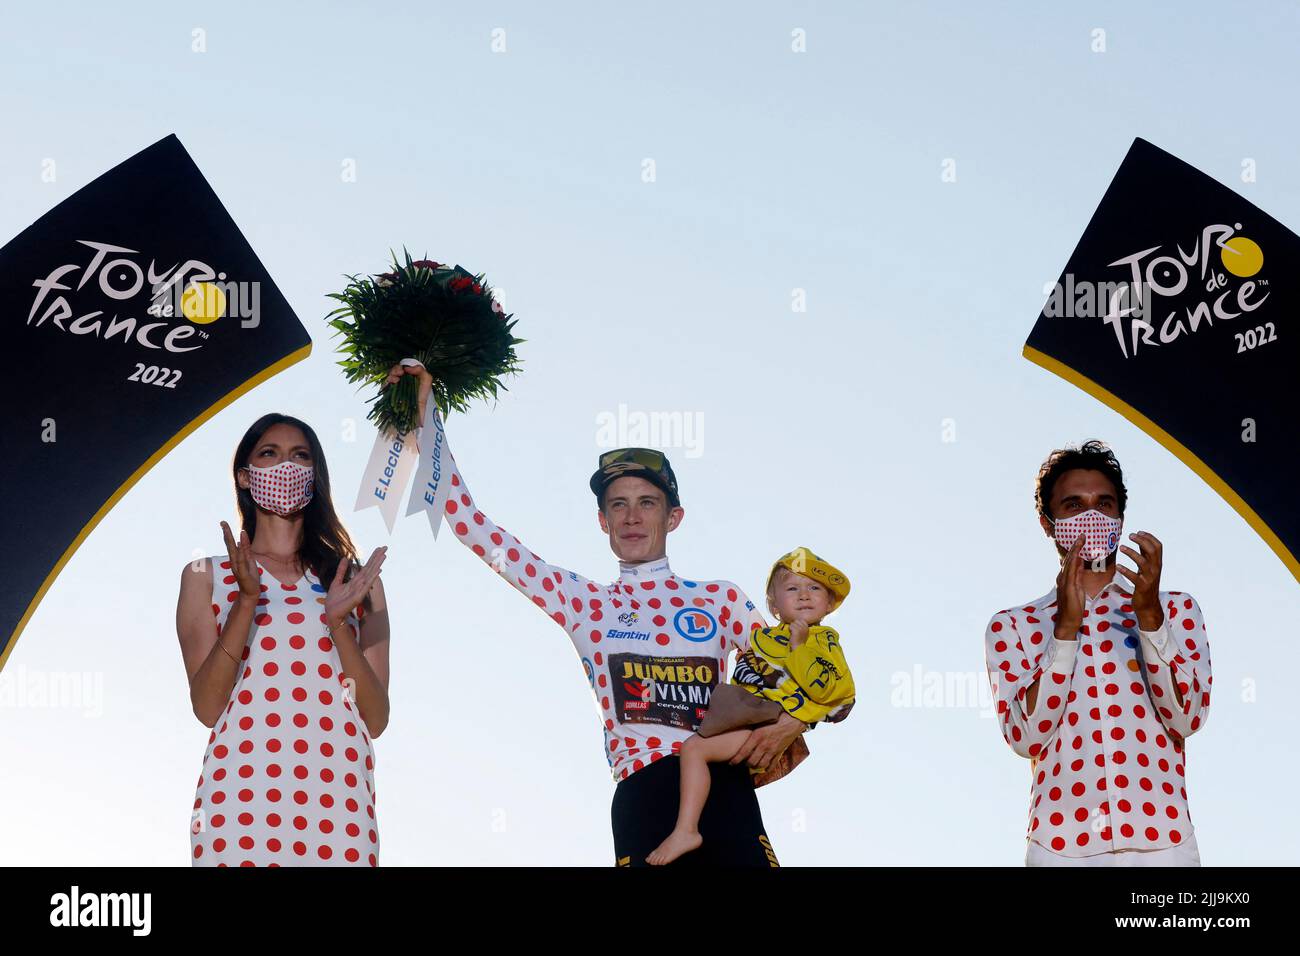 Cycling - Tour de France - Stage 21 - Paris La Defense Arena to Champs-Elysees - France - July 24, 2022 Jumbo - Visma's Jonas Vingegaard celebrates on the podium wearing the polka-dot jersey holding his daughter Frida after winning the Tour de France REUTERS/Gonzalo Fuentes Stock Photo